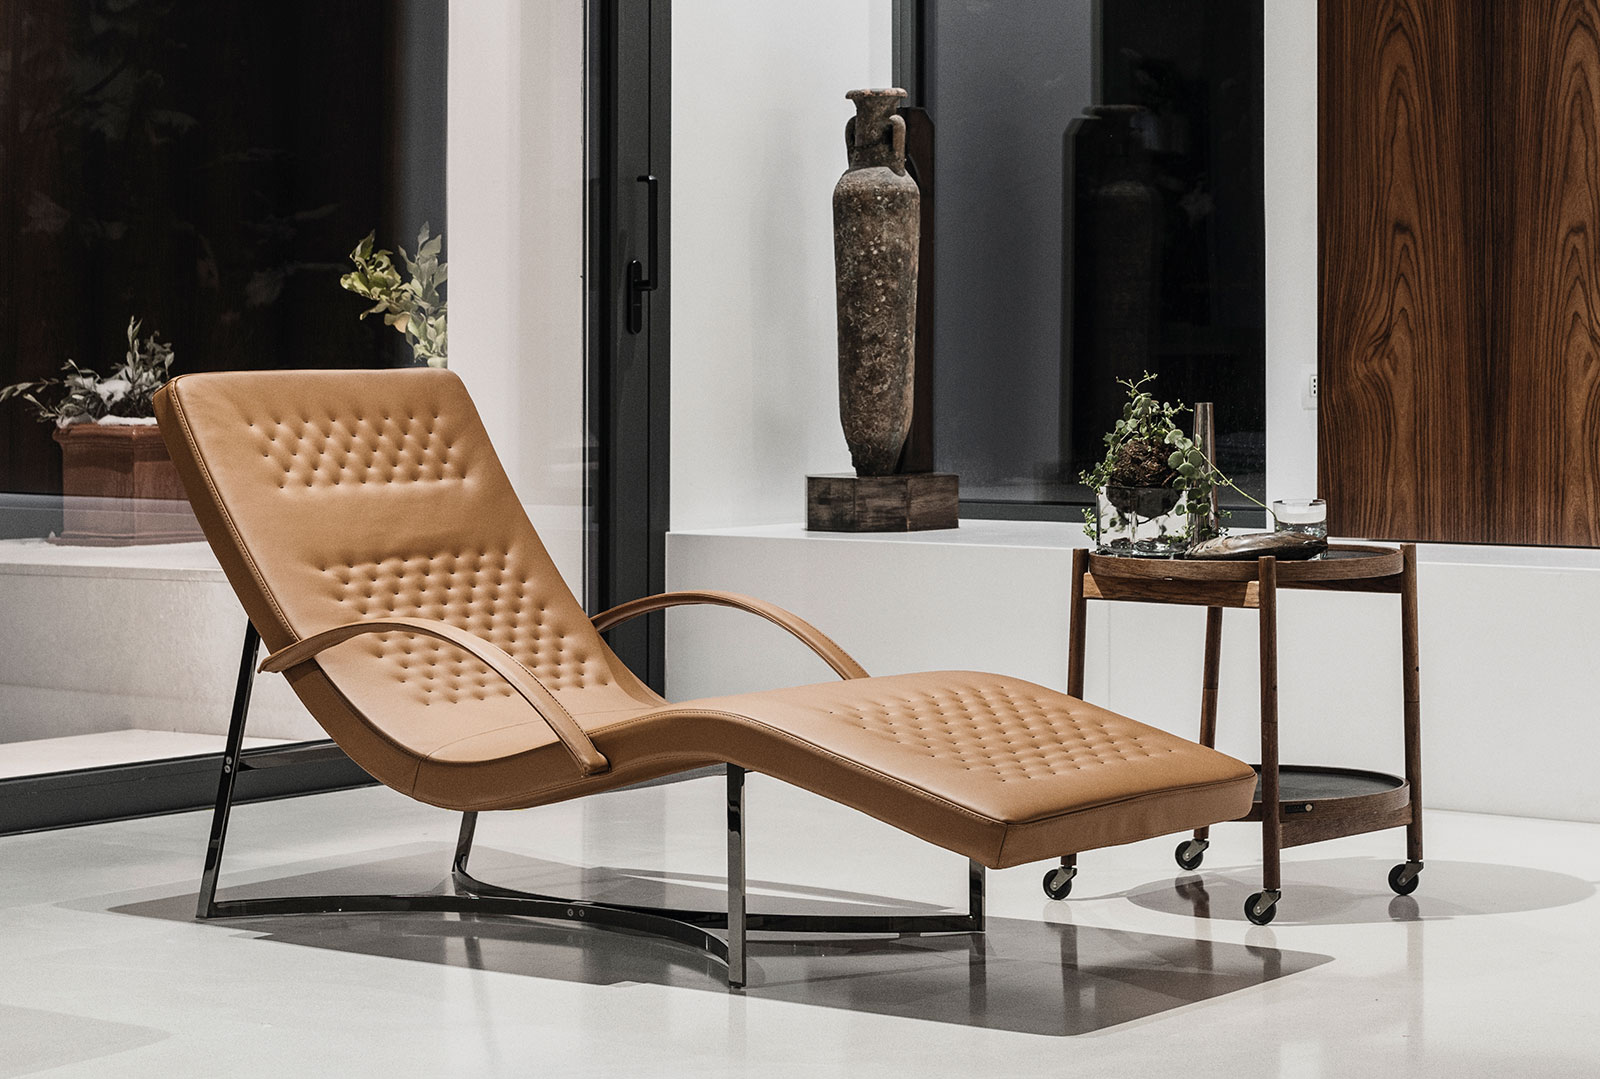 Chaise longue with a modern design - SELA